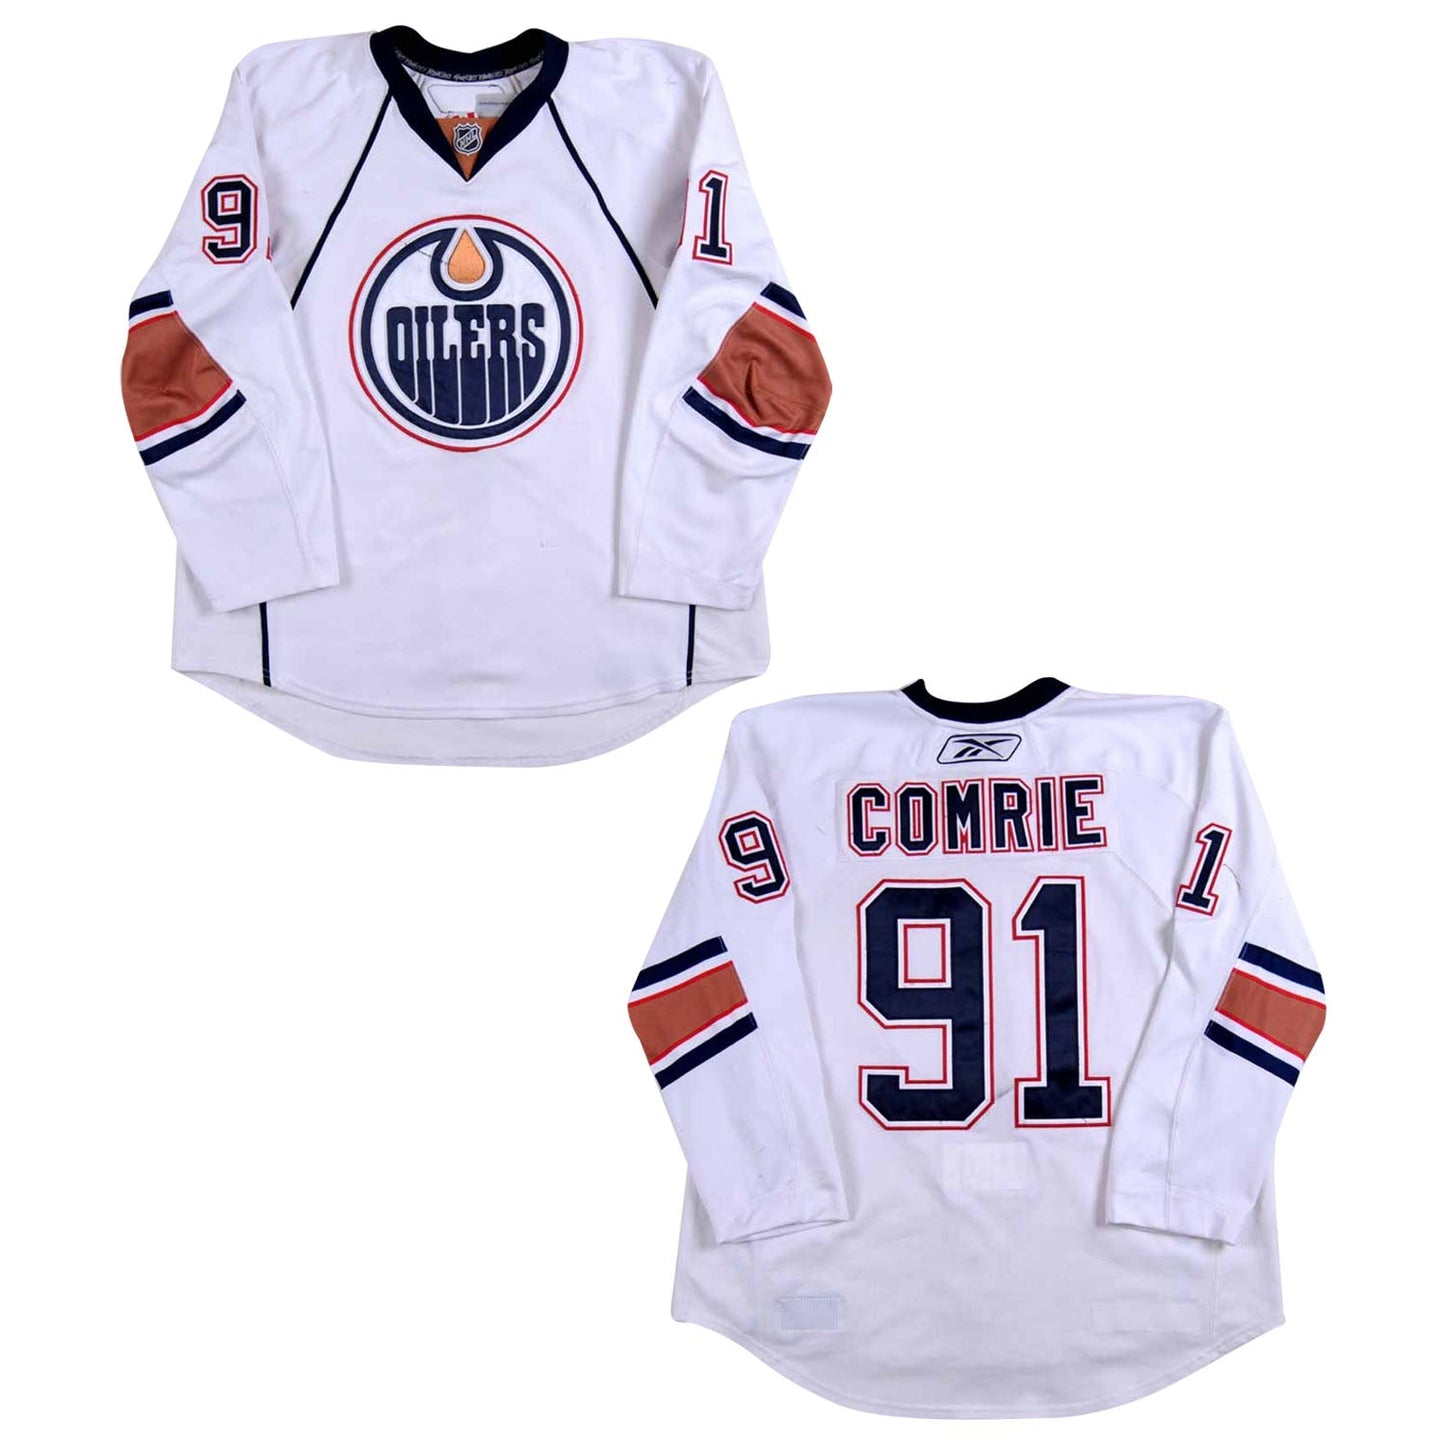 NHL Mike Comrie Edmonton Oilers 91 Jersey